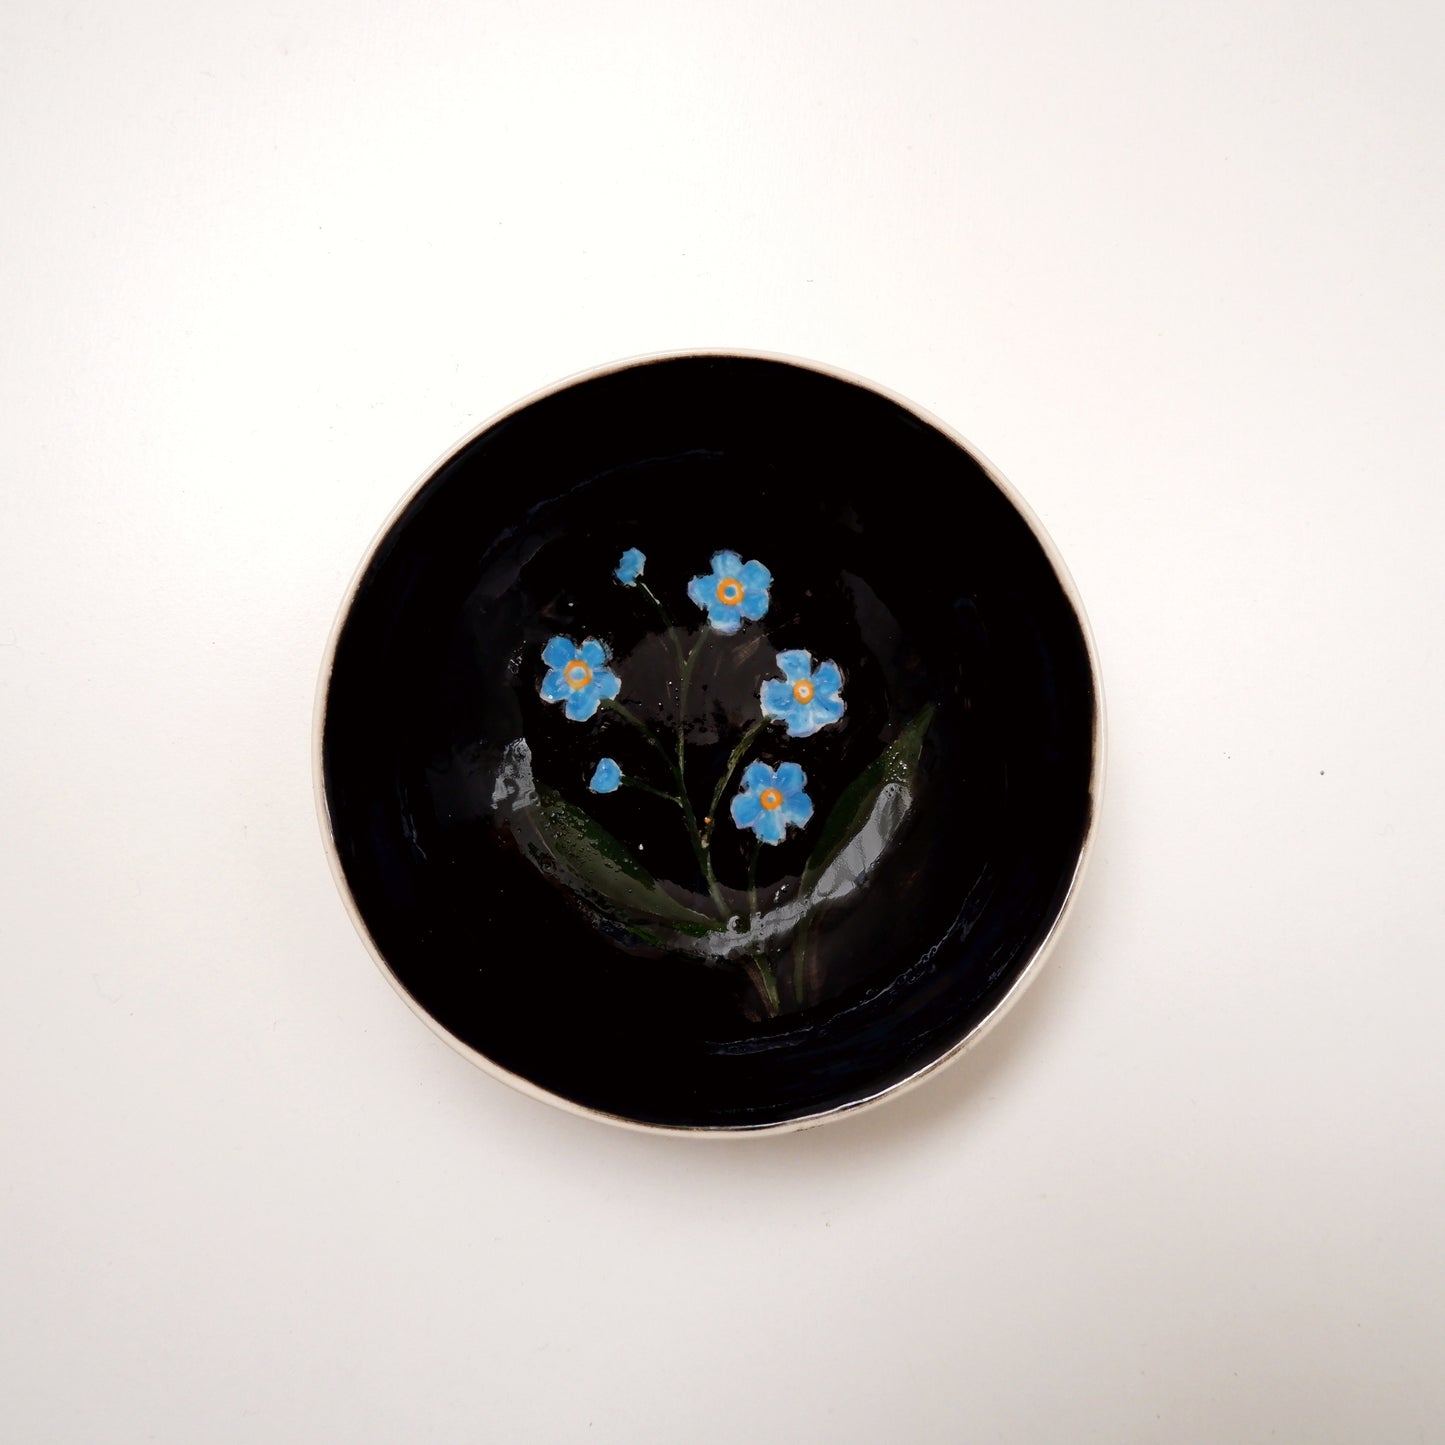 About Nature Ceramic Bowls